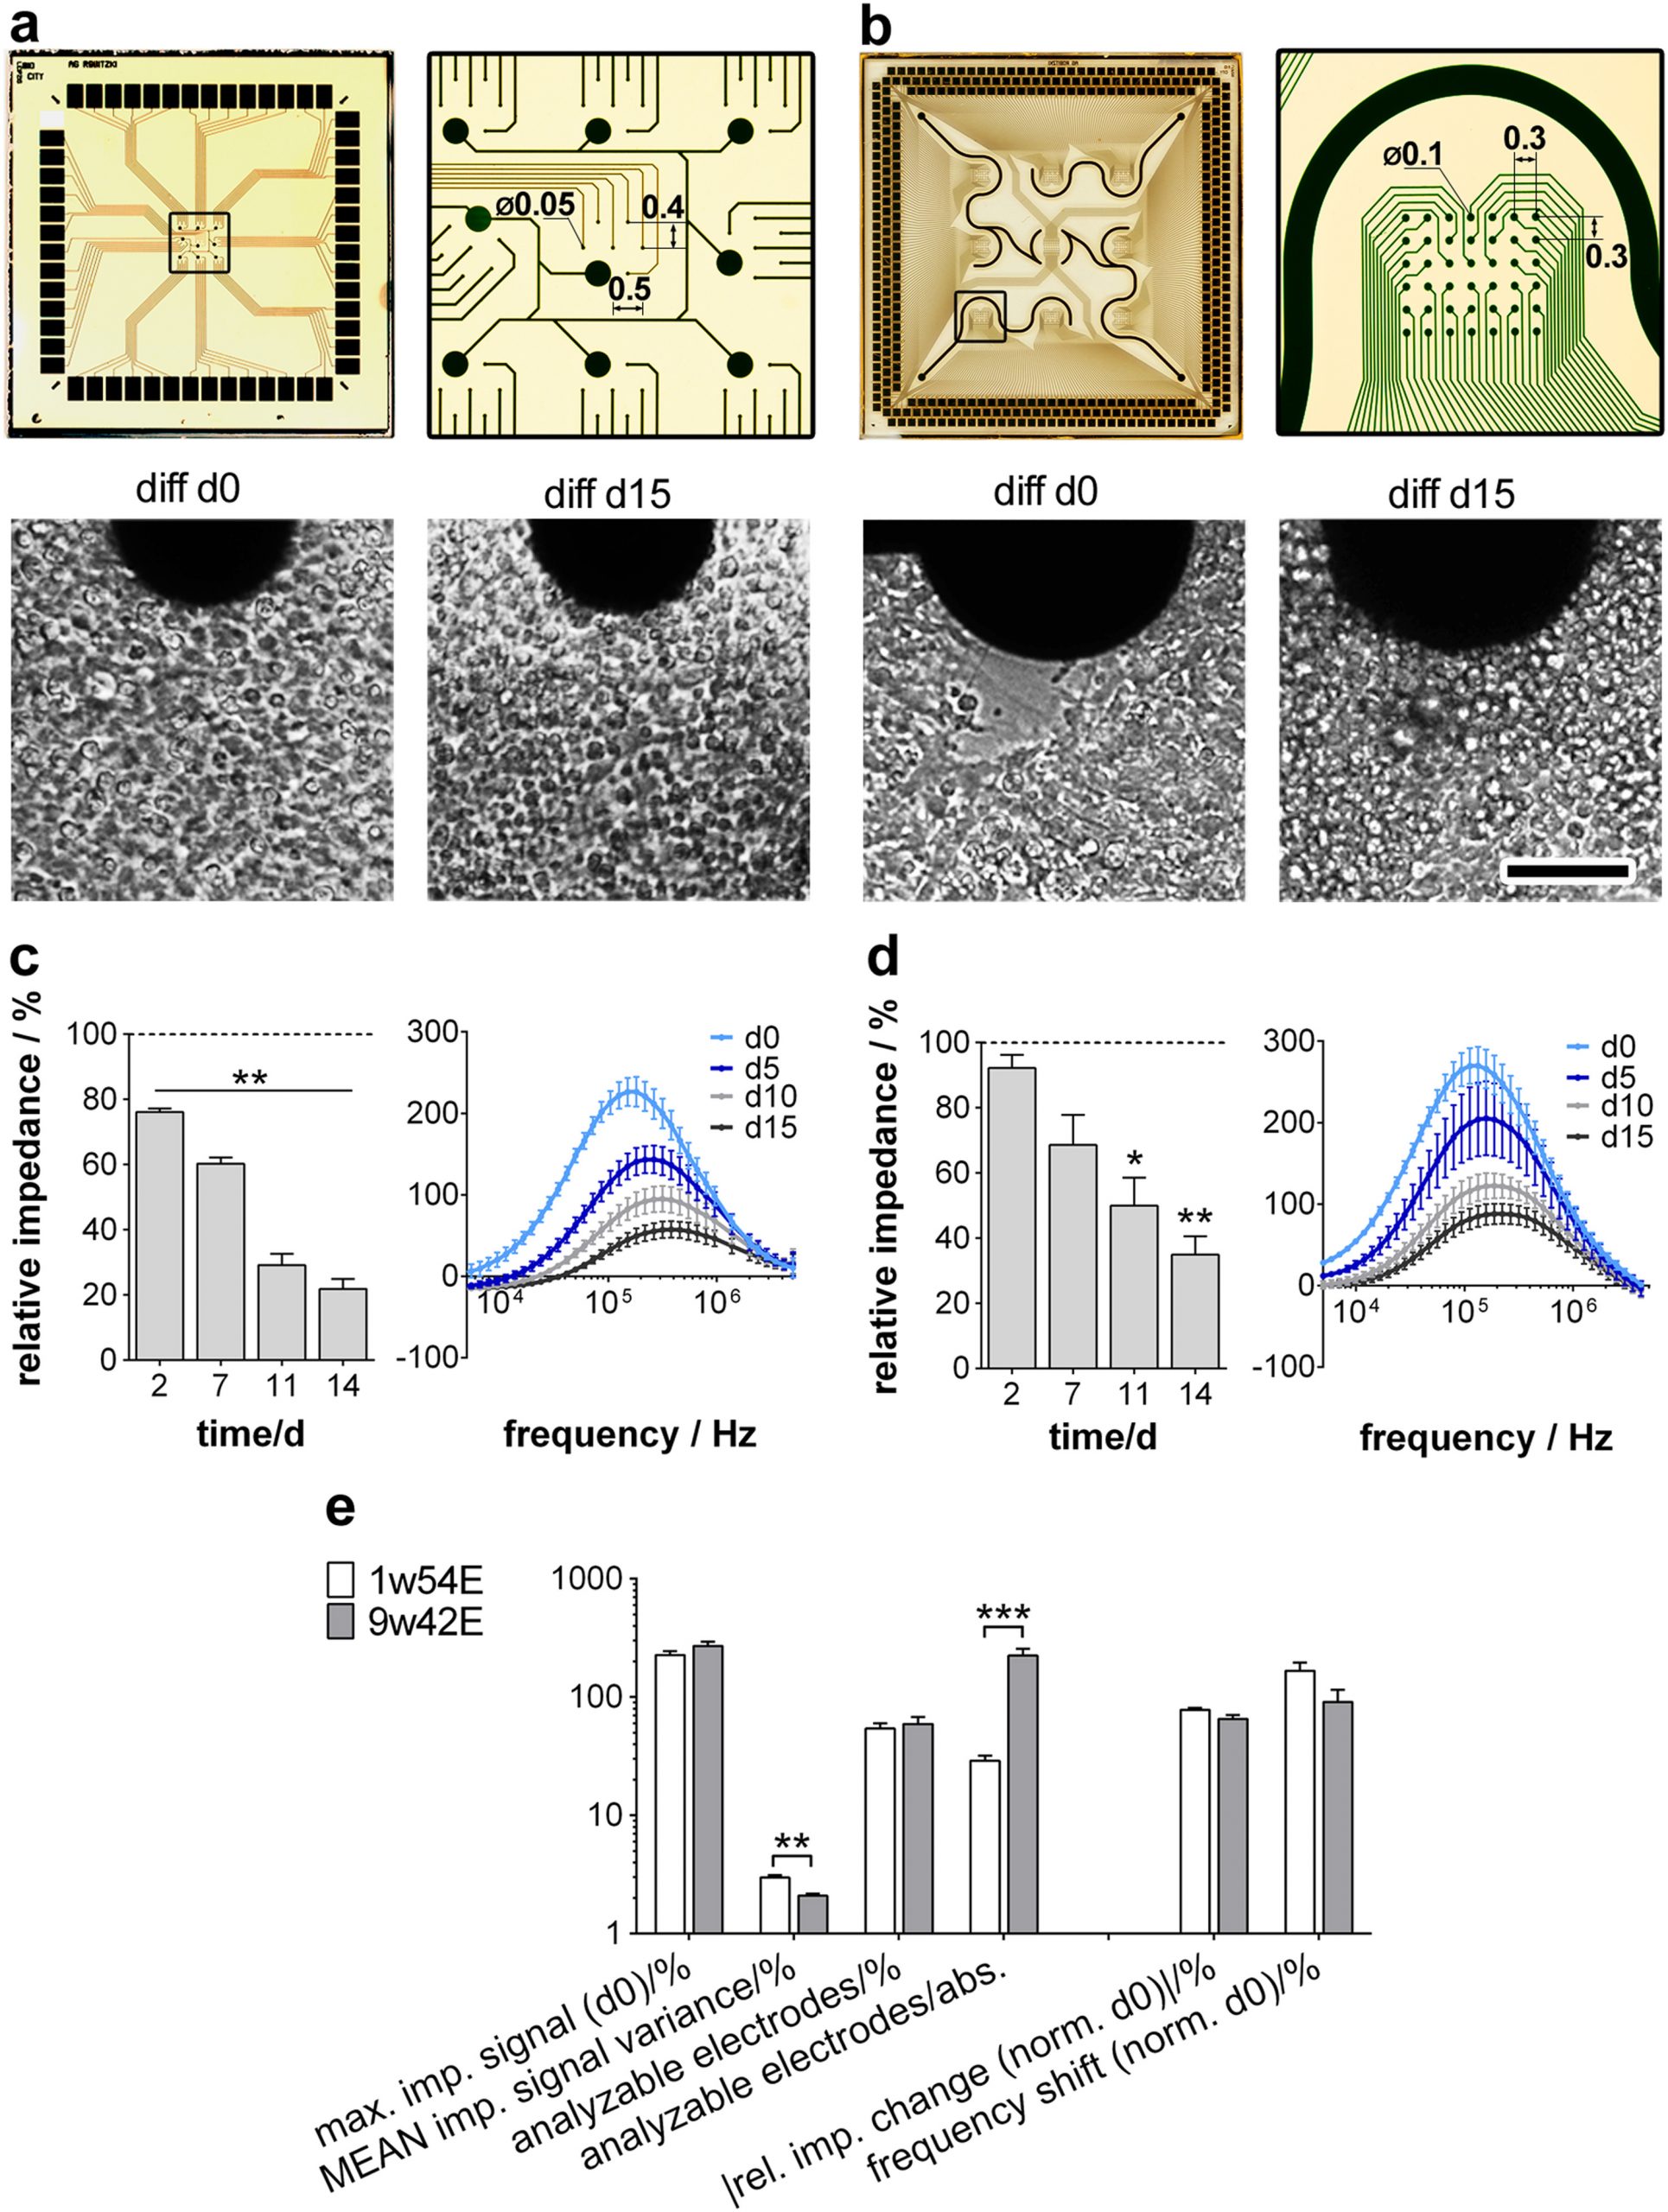 Impedimetric real-time monitoring of neural pluripotent stem cell differentiation process on microelectrode arrays